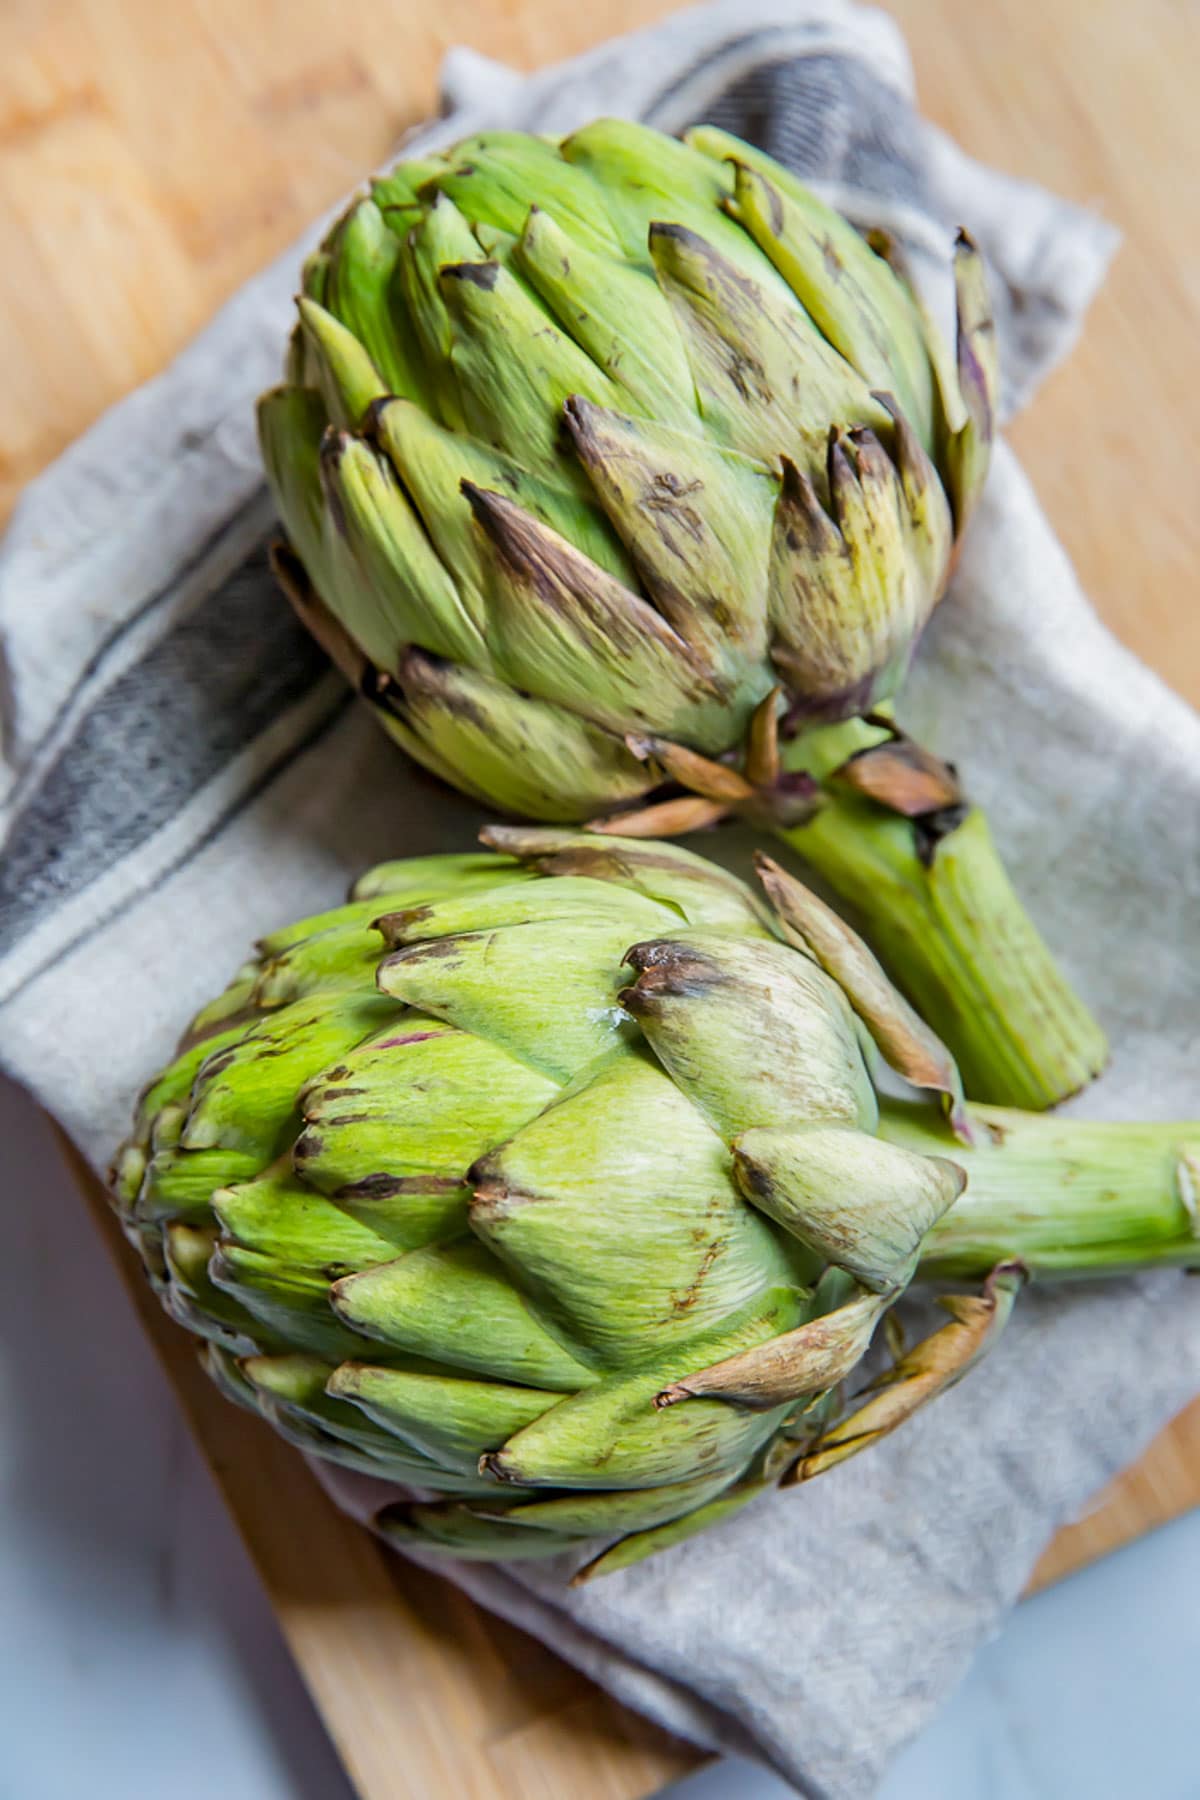 Two fresh, unboiled artichokes on a cutting board with a kitchen towel.